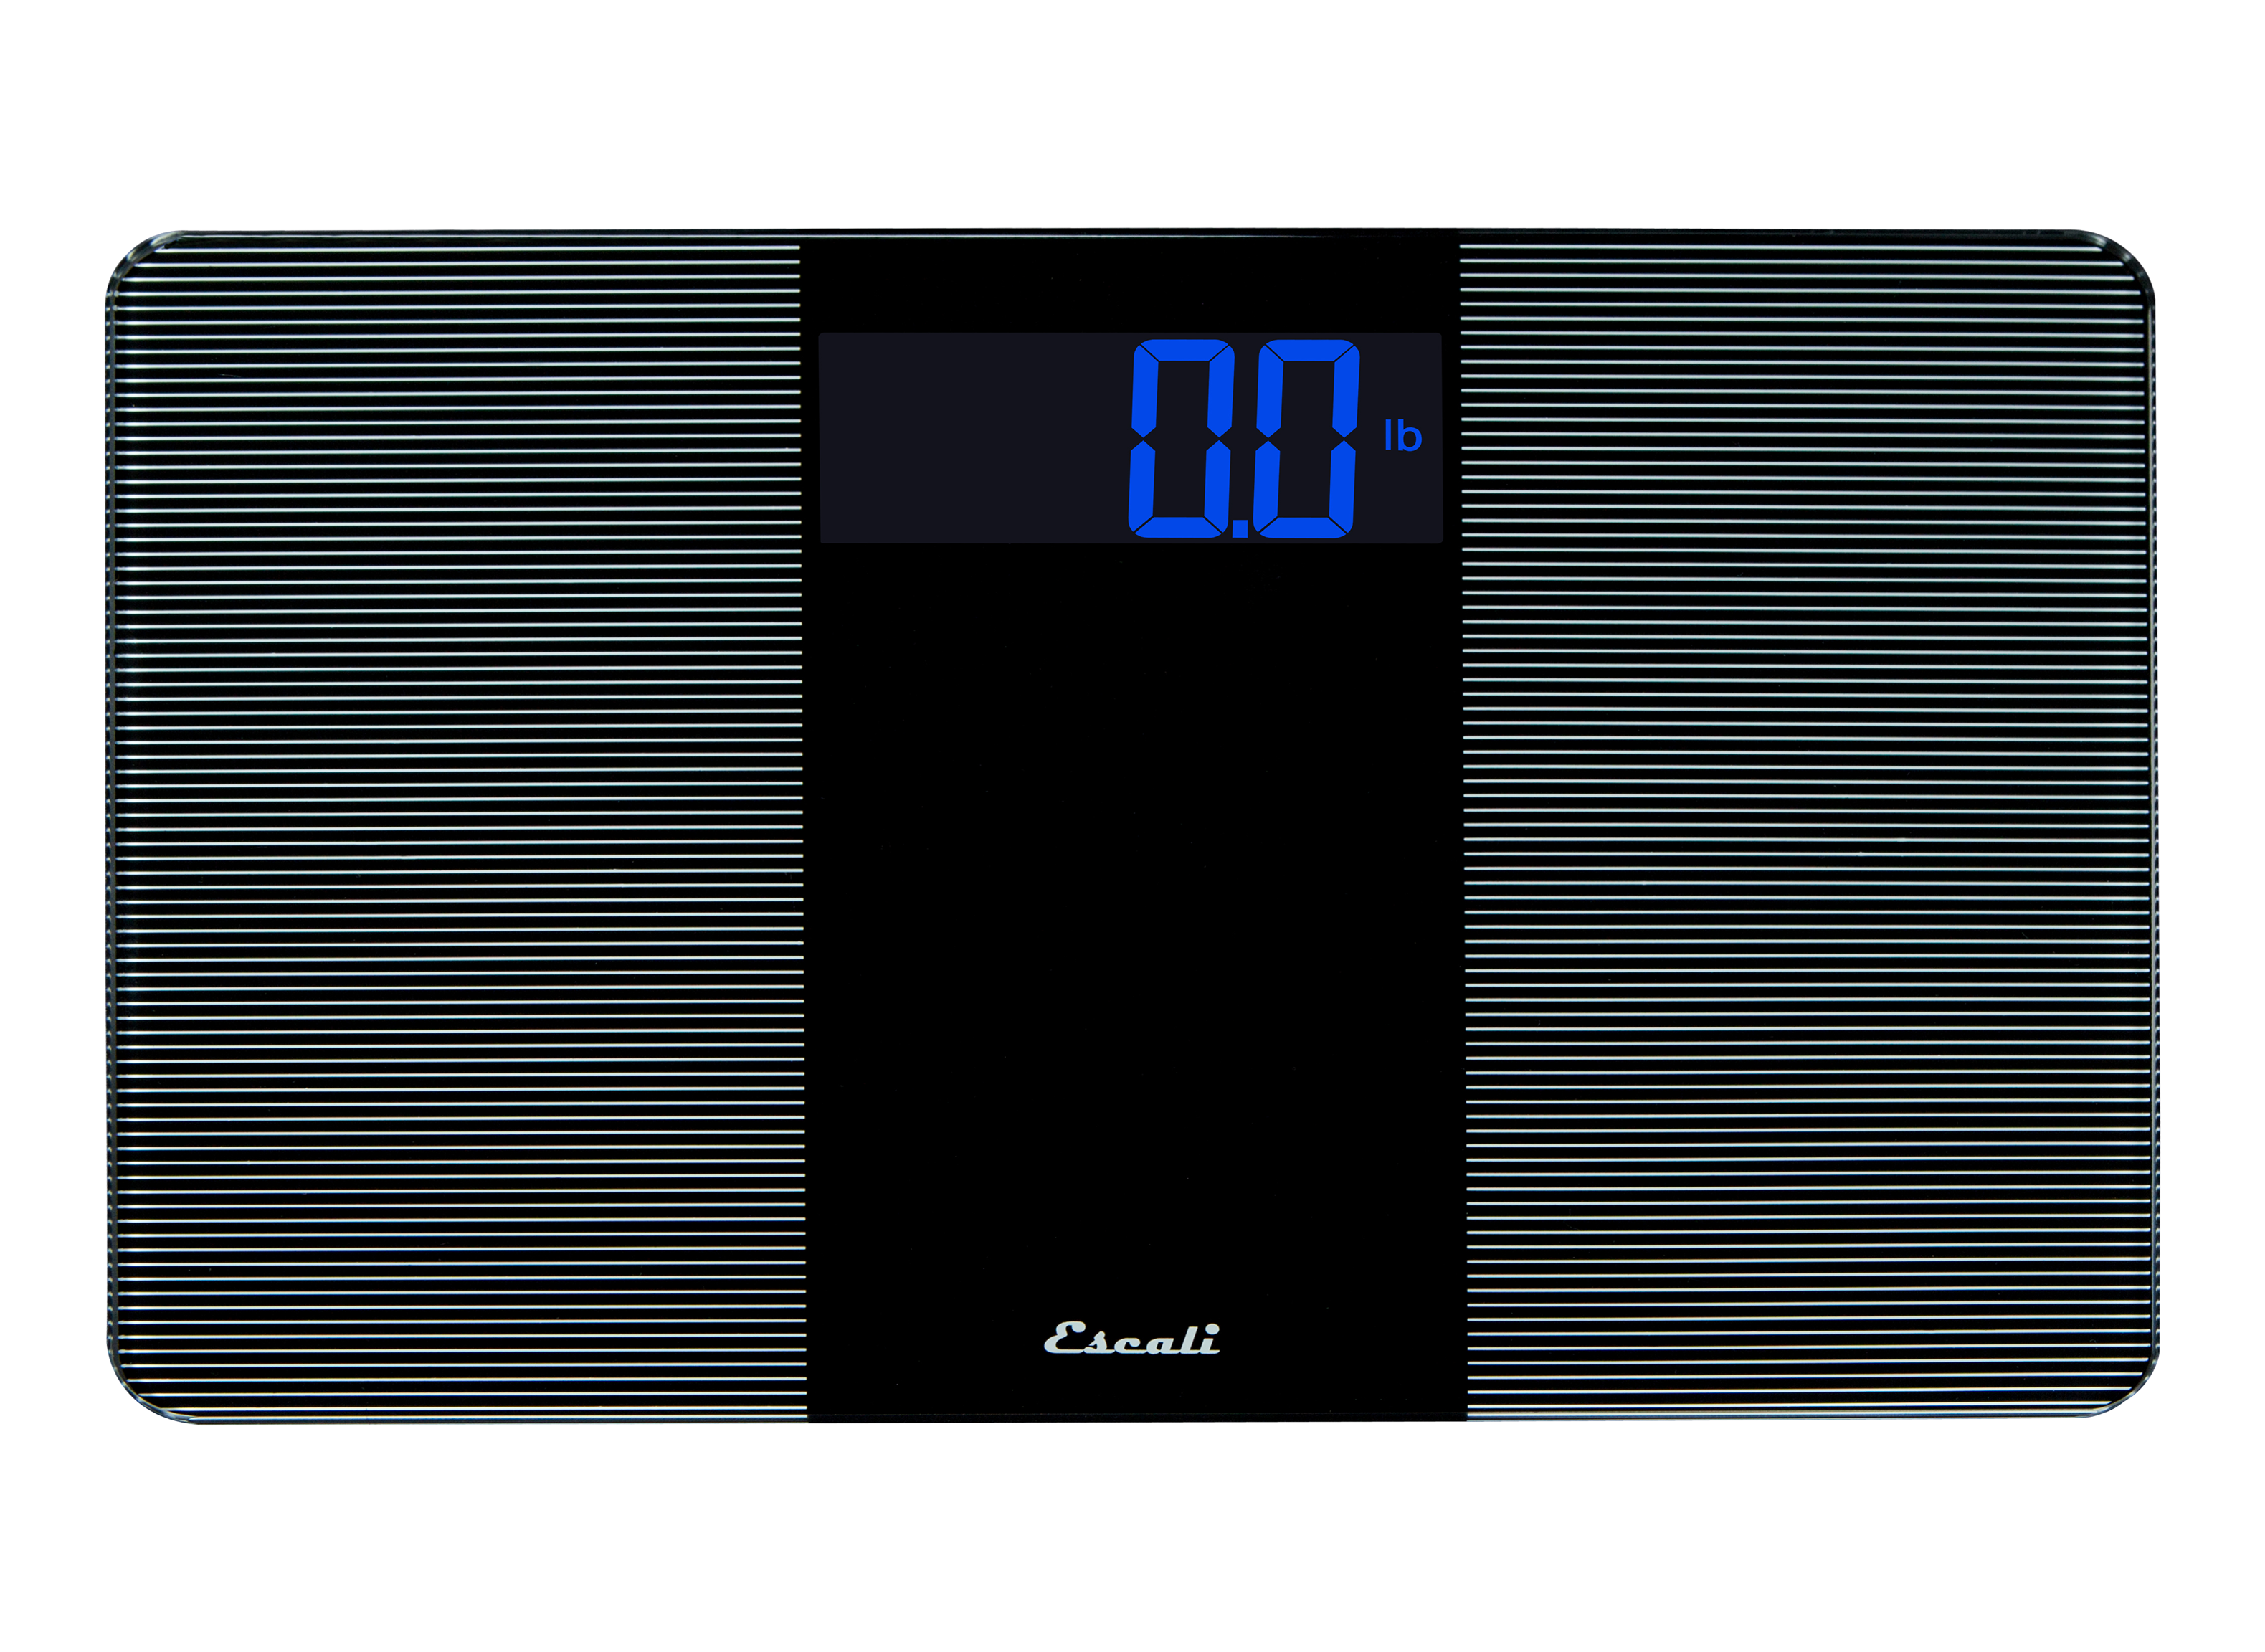 https://crdms.images.consumerreports.org/prod/products/cr/models/402911-digital-scales-escali-extra-wide-digital-10017581.png